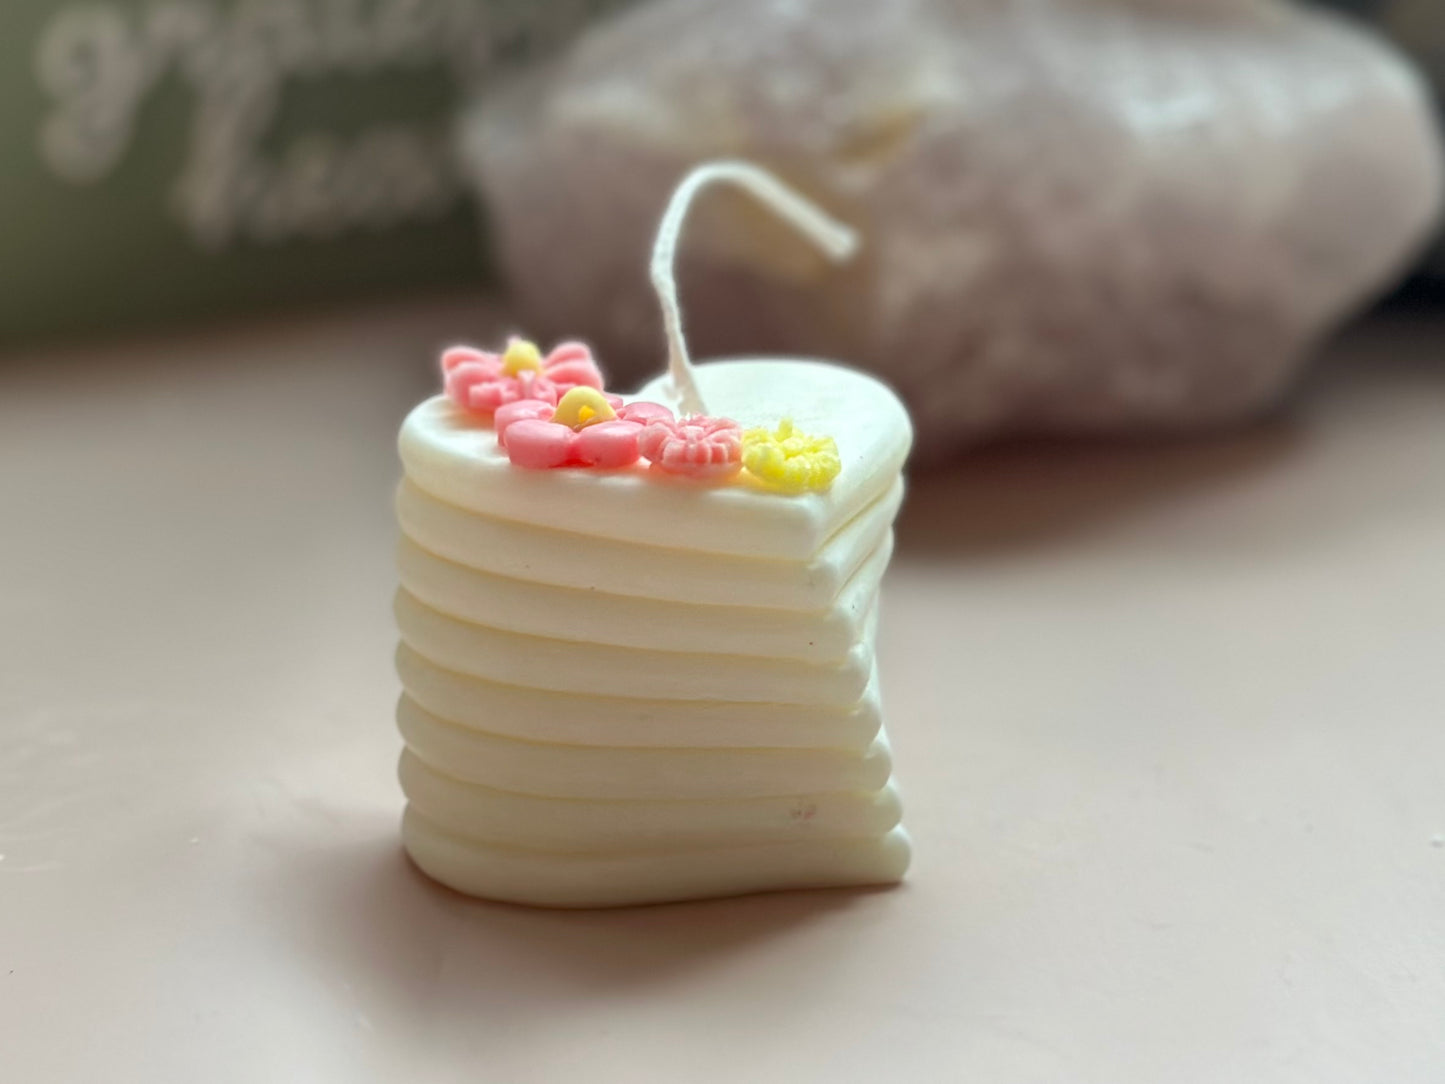 Harmonium Heart Candle, Floral Heart Candle, Home Decor, Love Candle, White Beeswax Candle